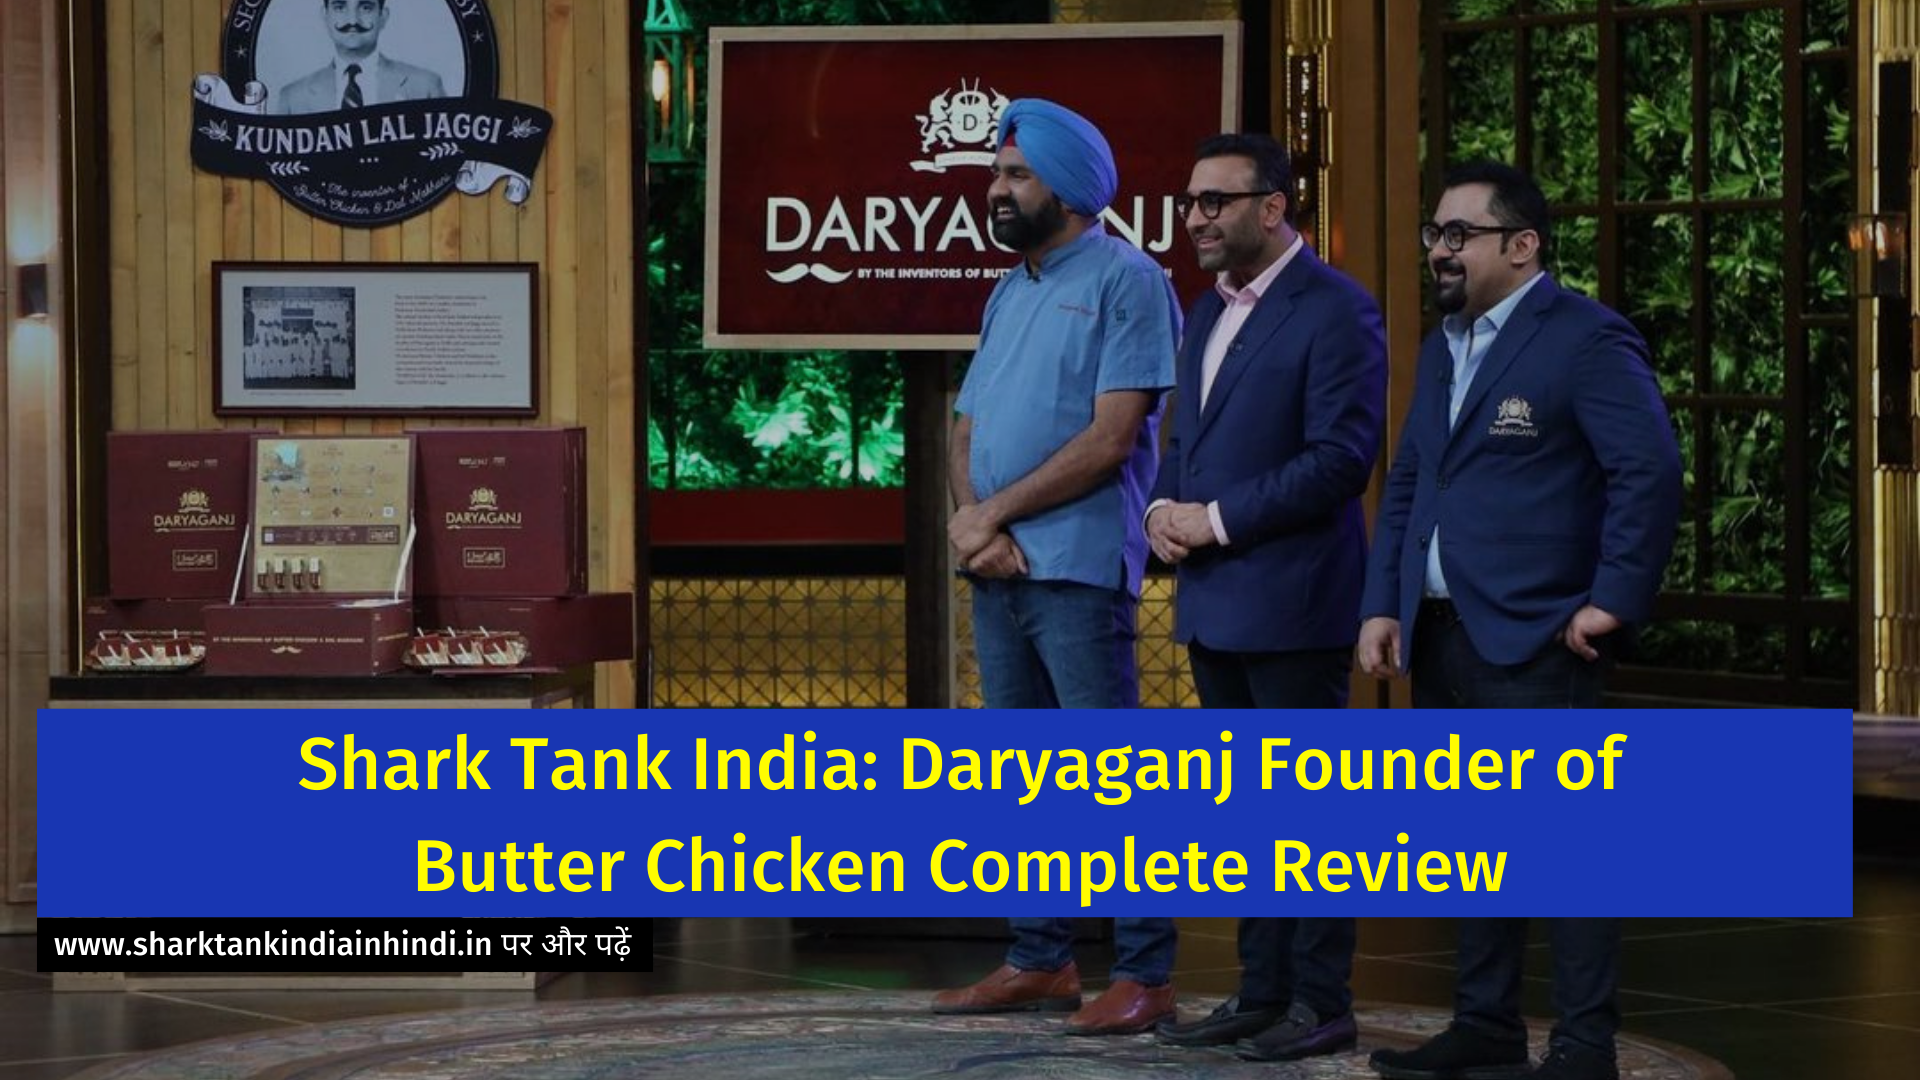 Shark Tank India: Daryaganj Founder of Butter Chicken Complete Review